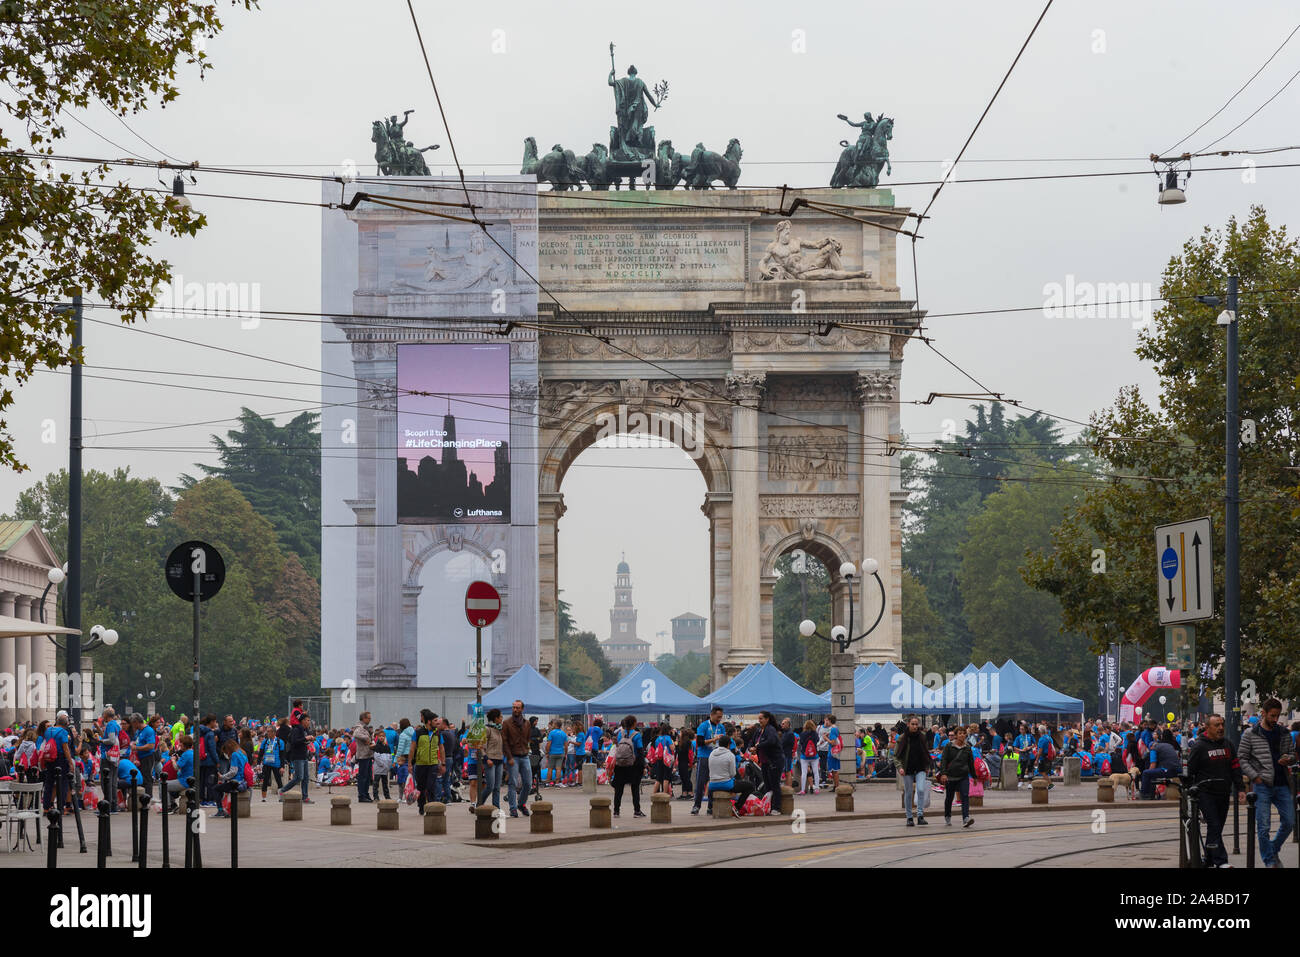 MILAN, ITALY - OCTOBER 13 2019: Athletes celebrate the end of the Deejay Ten at the Arco della Pace, a running event organized by Deejay Radio for the Stock Photo